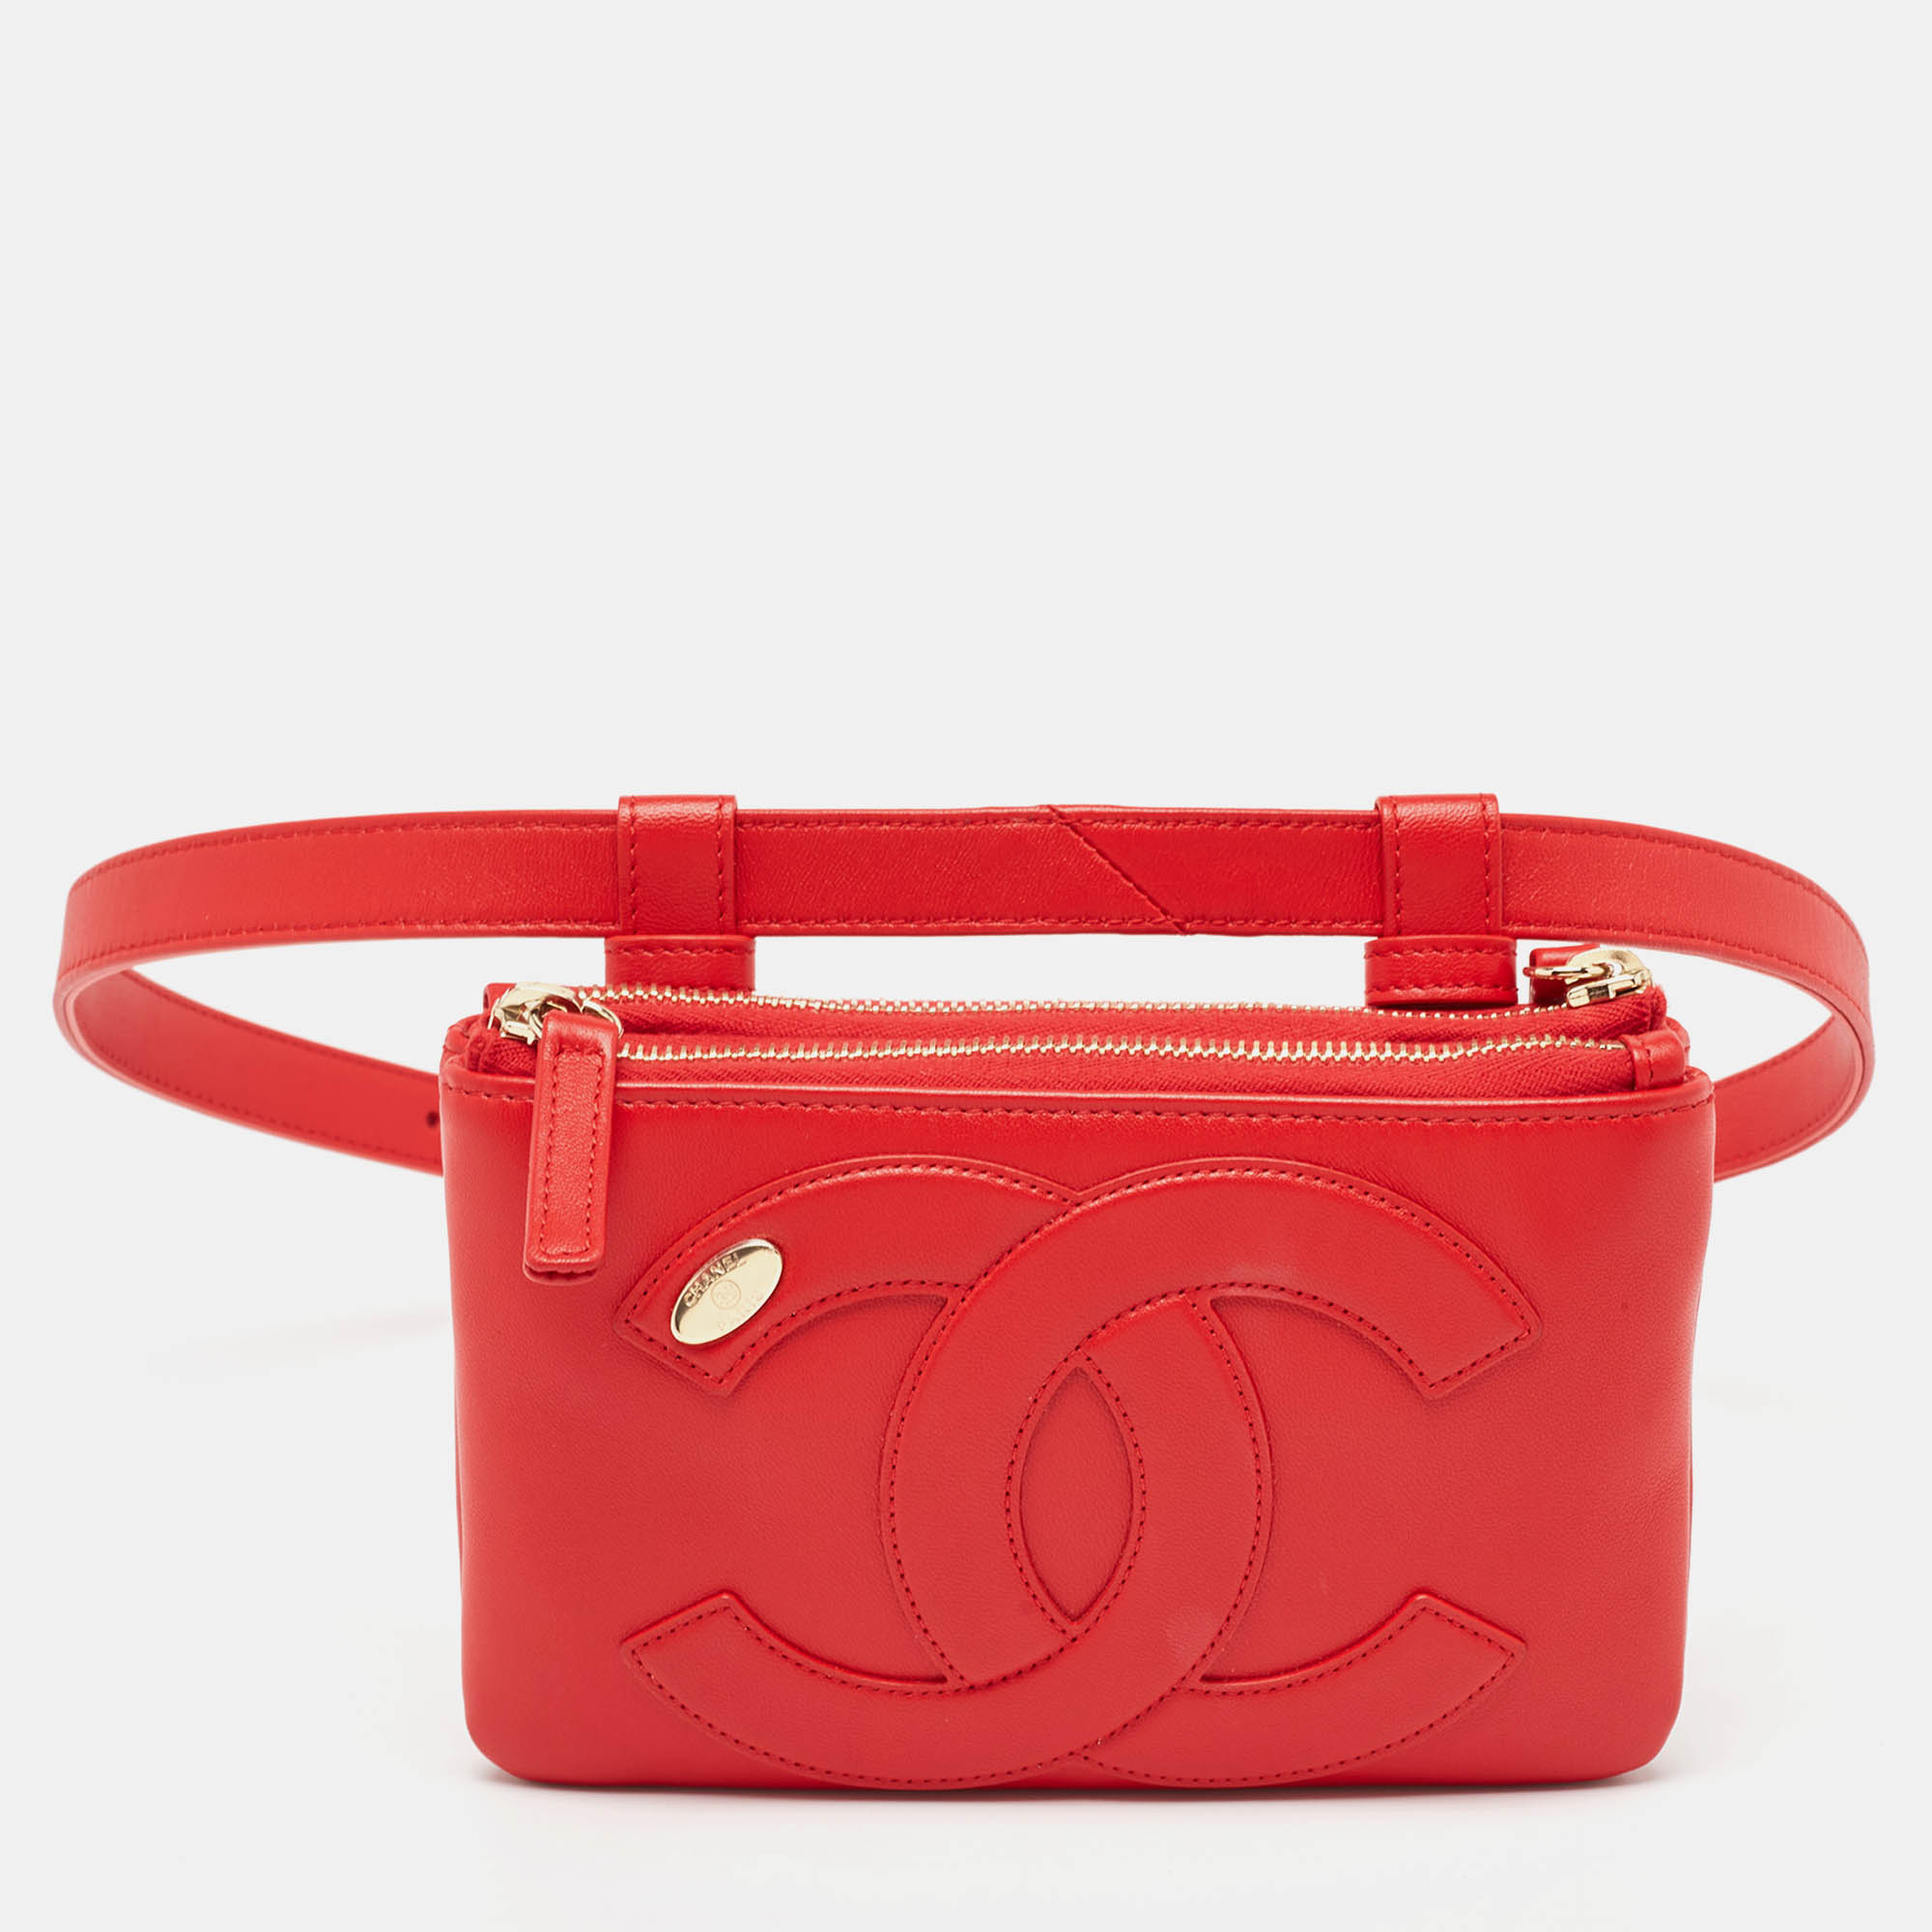 Chanel red leather cc mania waist bag